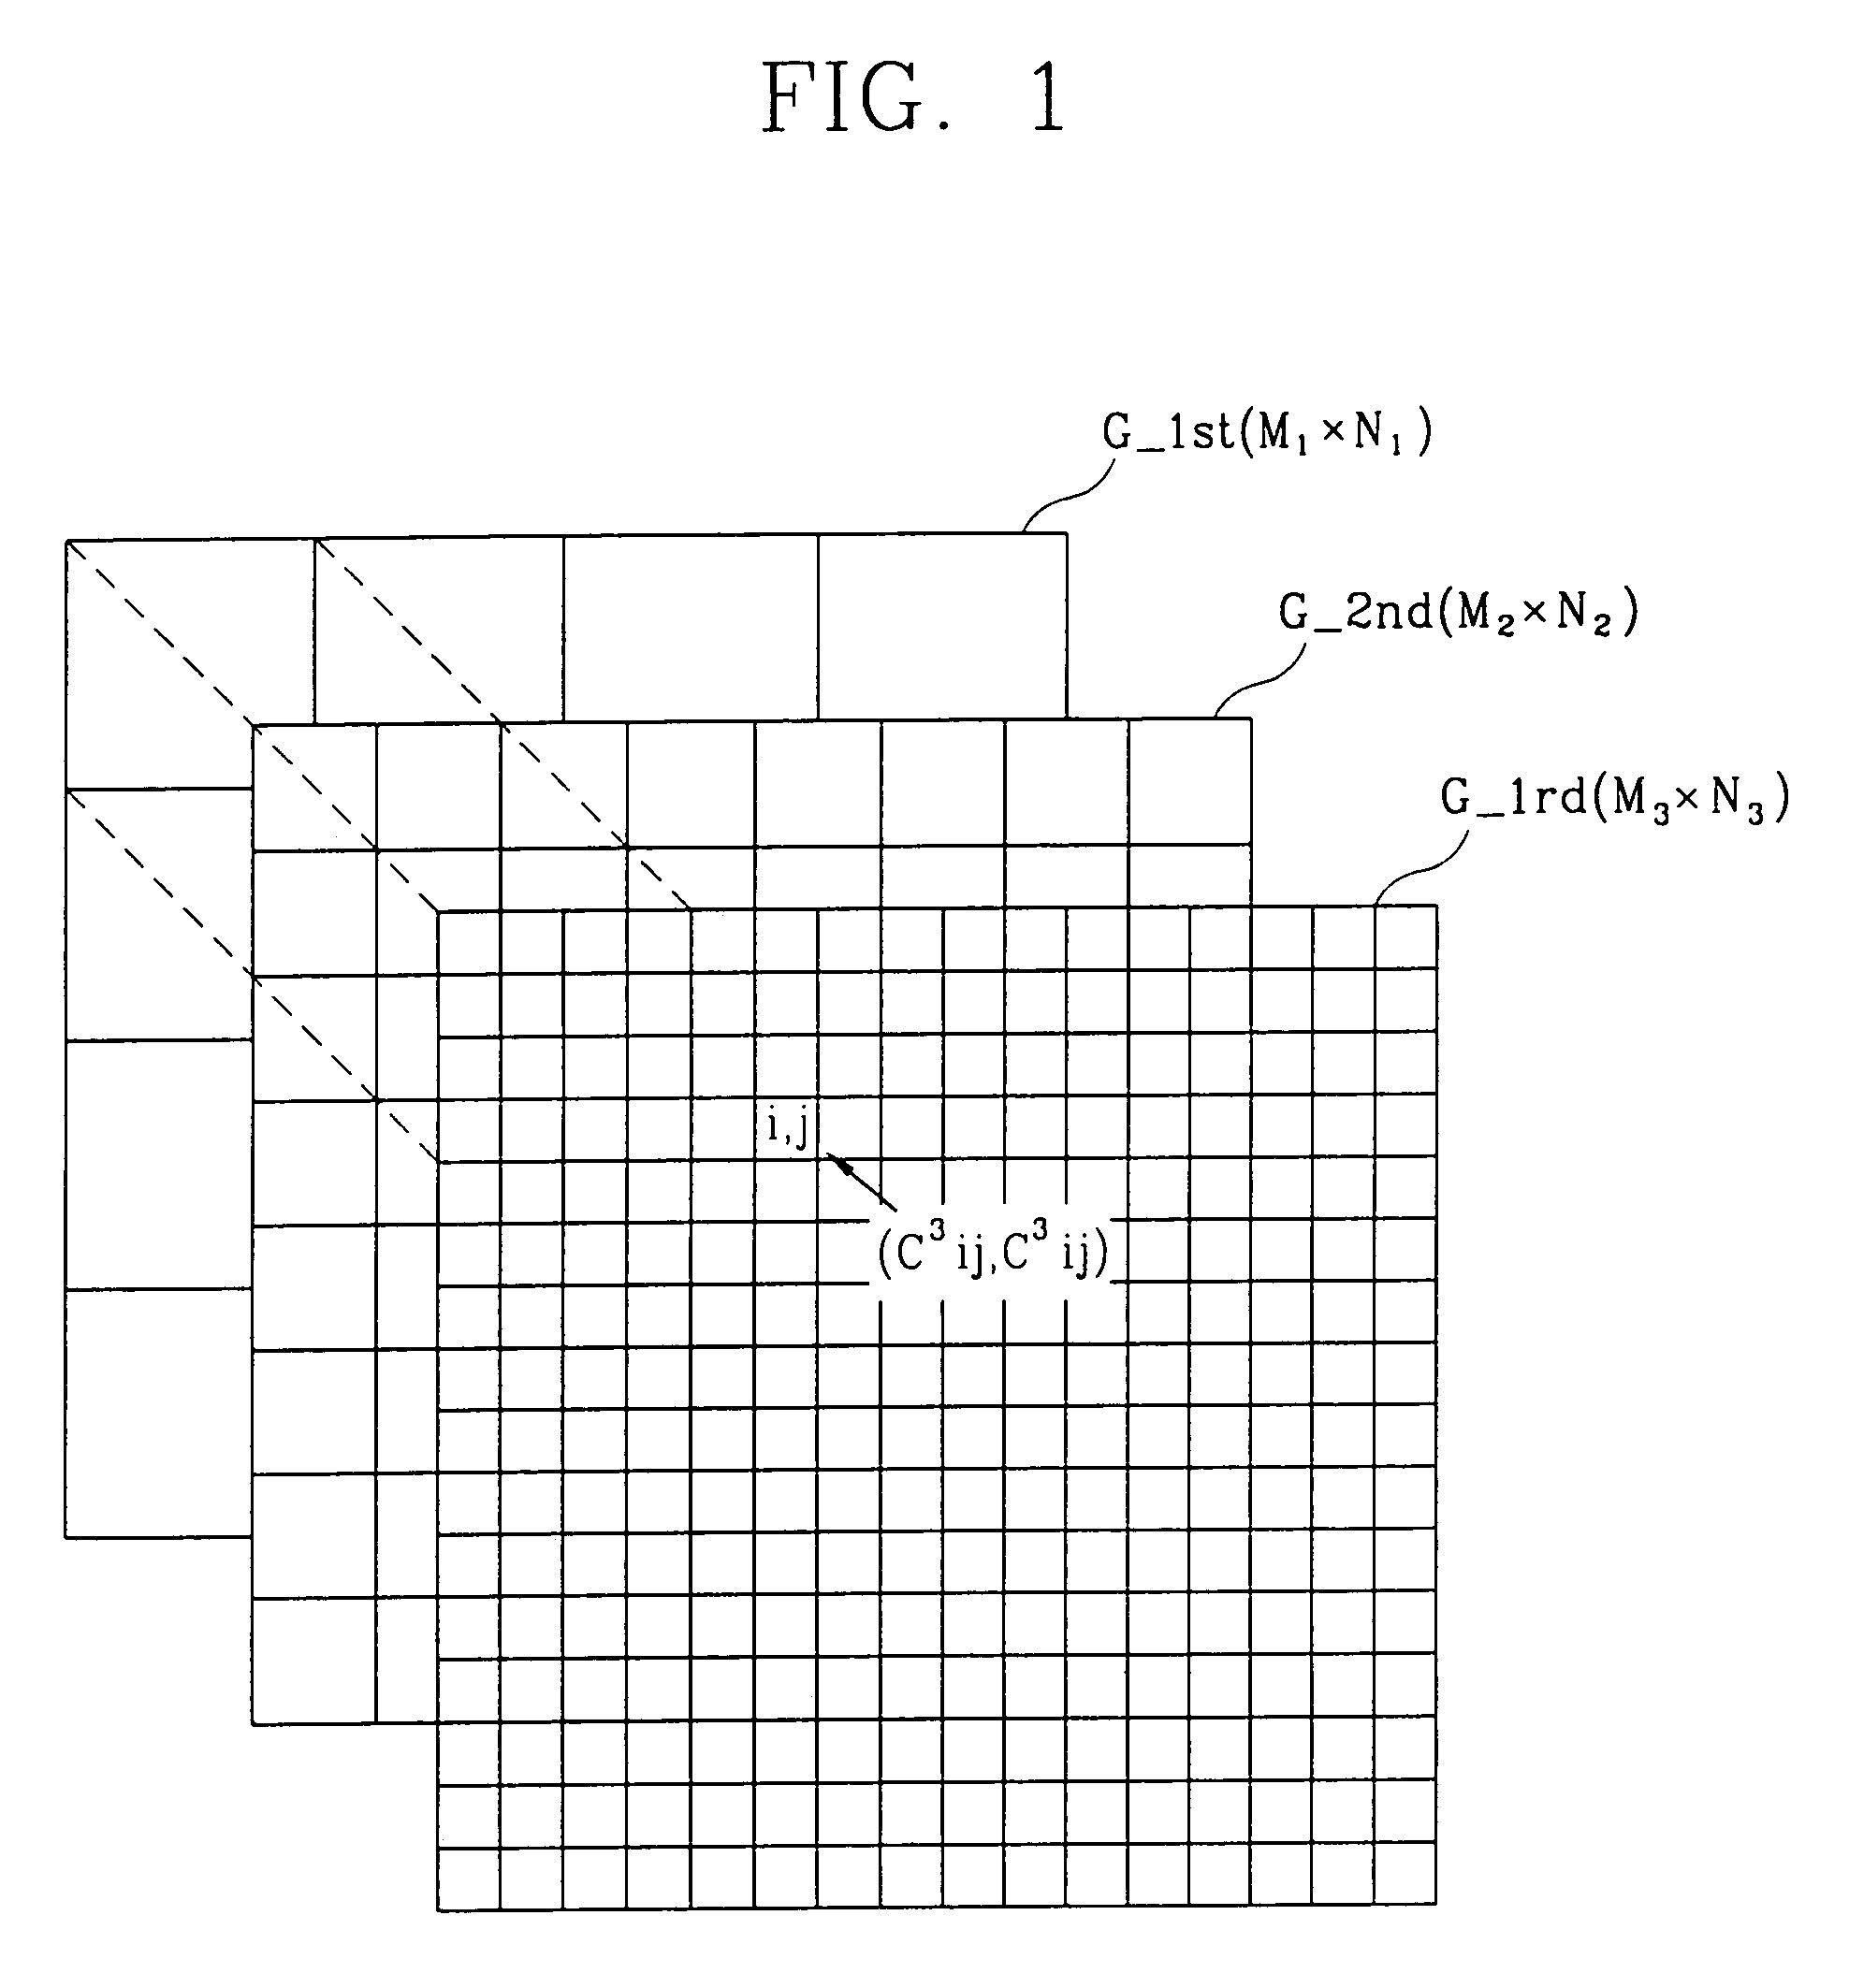 Multilevel image grid data structure and image search method using the same